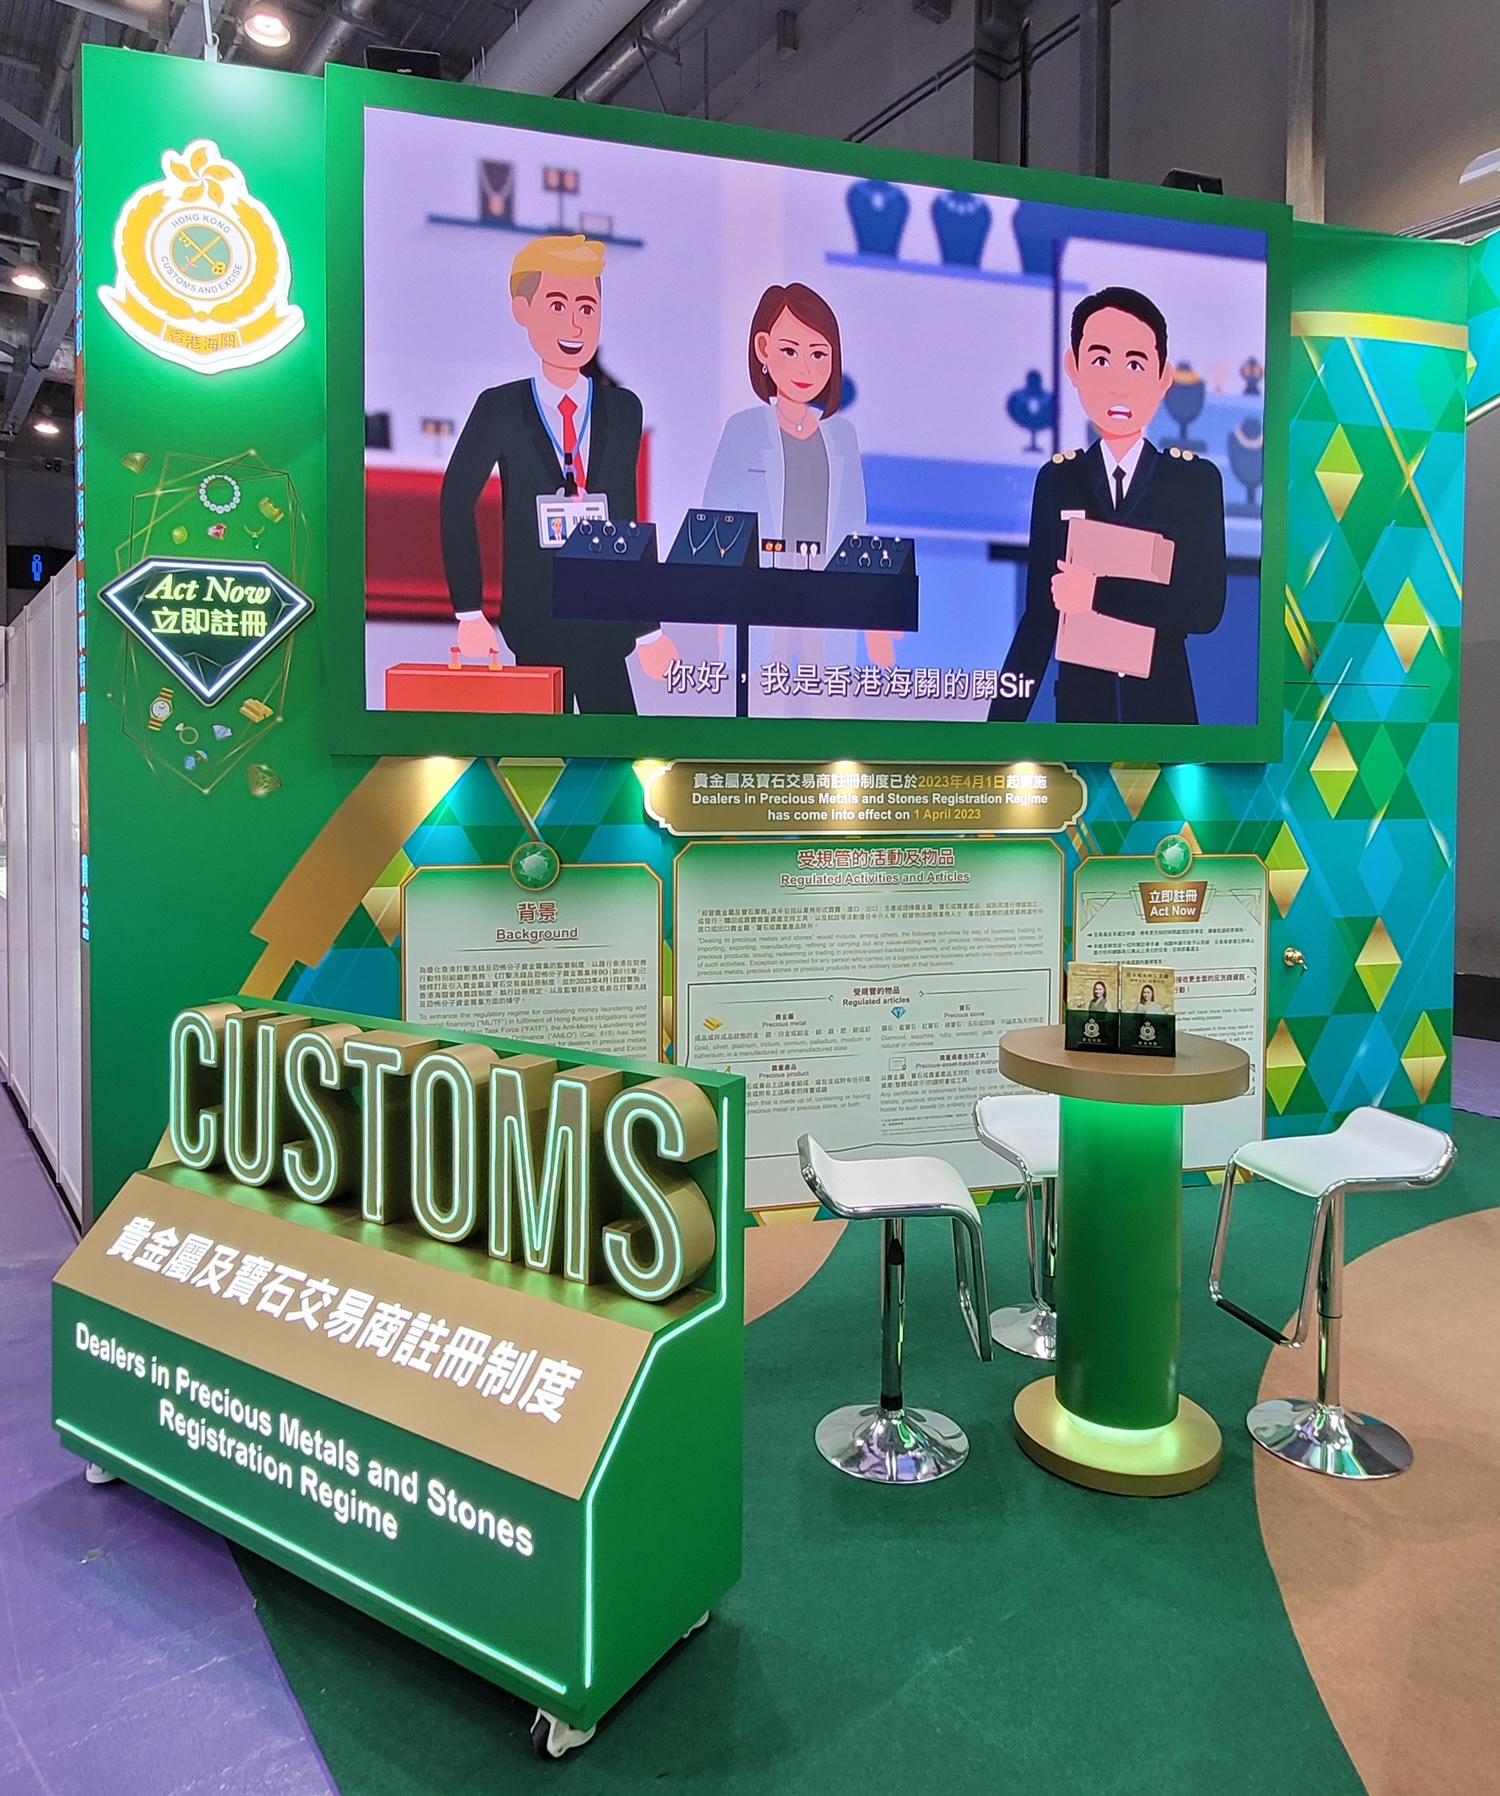 Hong Kong Customs will set up a booth at the Jewellery & Gem WORLD Hong Kong, to be held at the AsiaWorld-Expo, from tomorrow (September 18) for five consecutive days to publicise the Dealers in Precious Metals and Stones Regulatory Regime, and will provide on-site counter services to assist non-Hong Kong dealers in submitting a cash transaction report during their participation in the exhibition. Photo shows the Hong Kong Customs' booth.